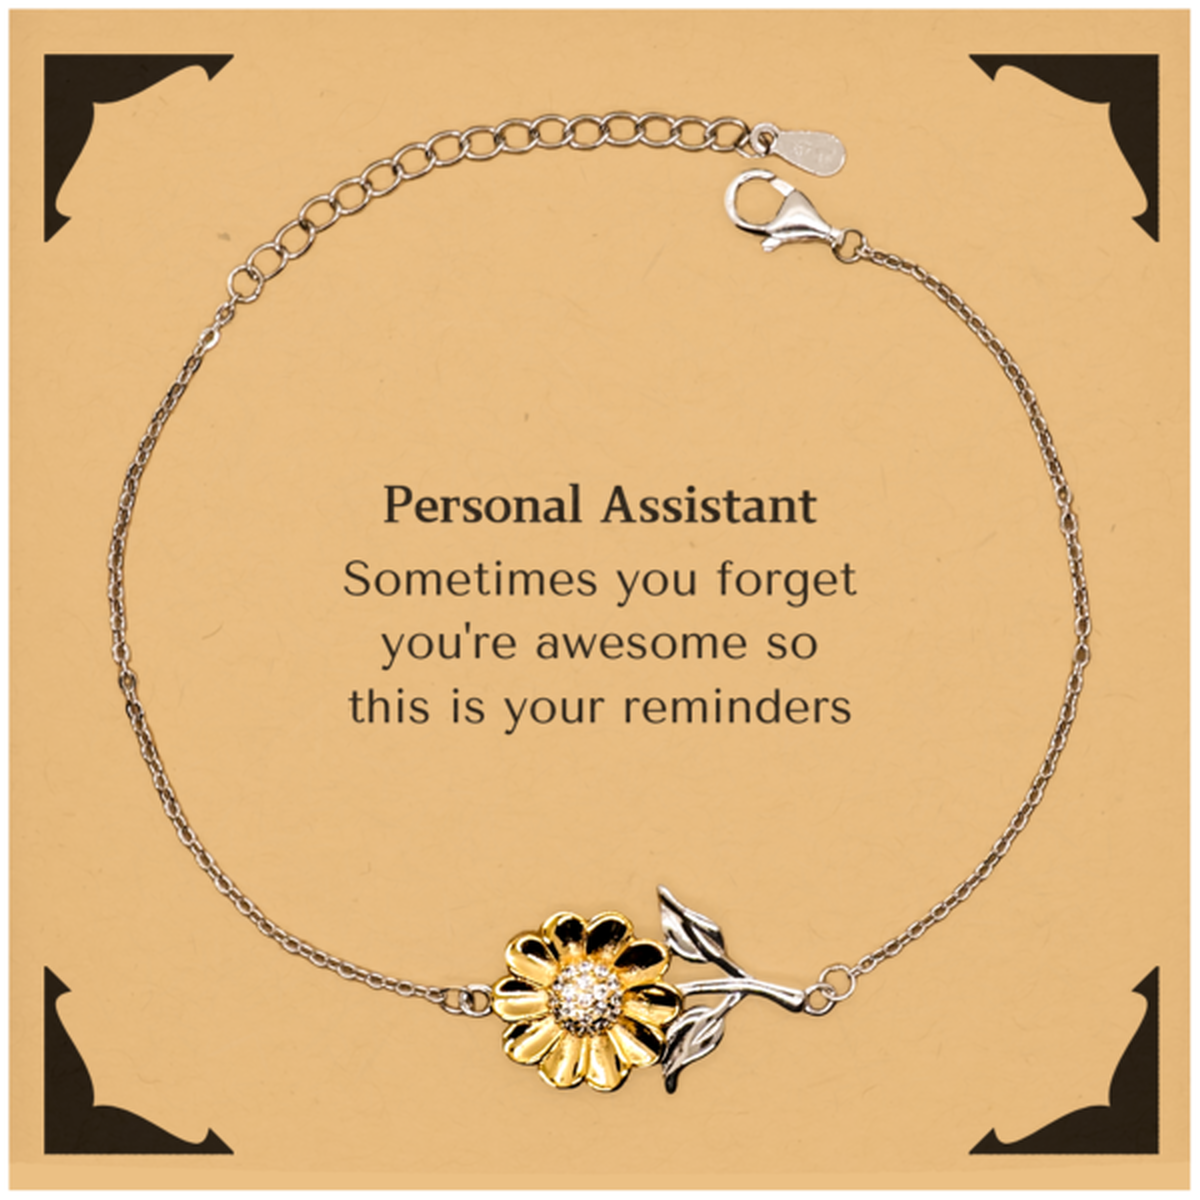 Sentimental Personal Assistant Sunflower Bracelet, Personal Assistant Sometimes you forget you're awesome so this is your reminders, Graduation Christmas Birthday Gifts for Personal Assistant, Men, Women, Coworkers